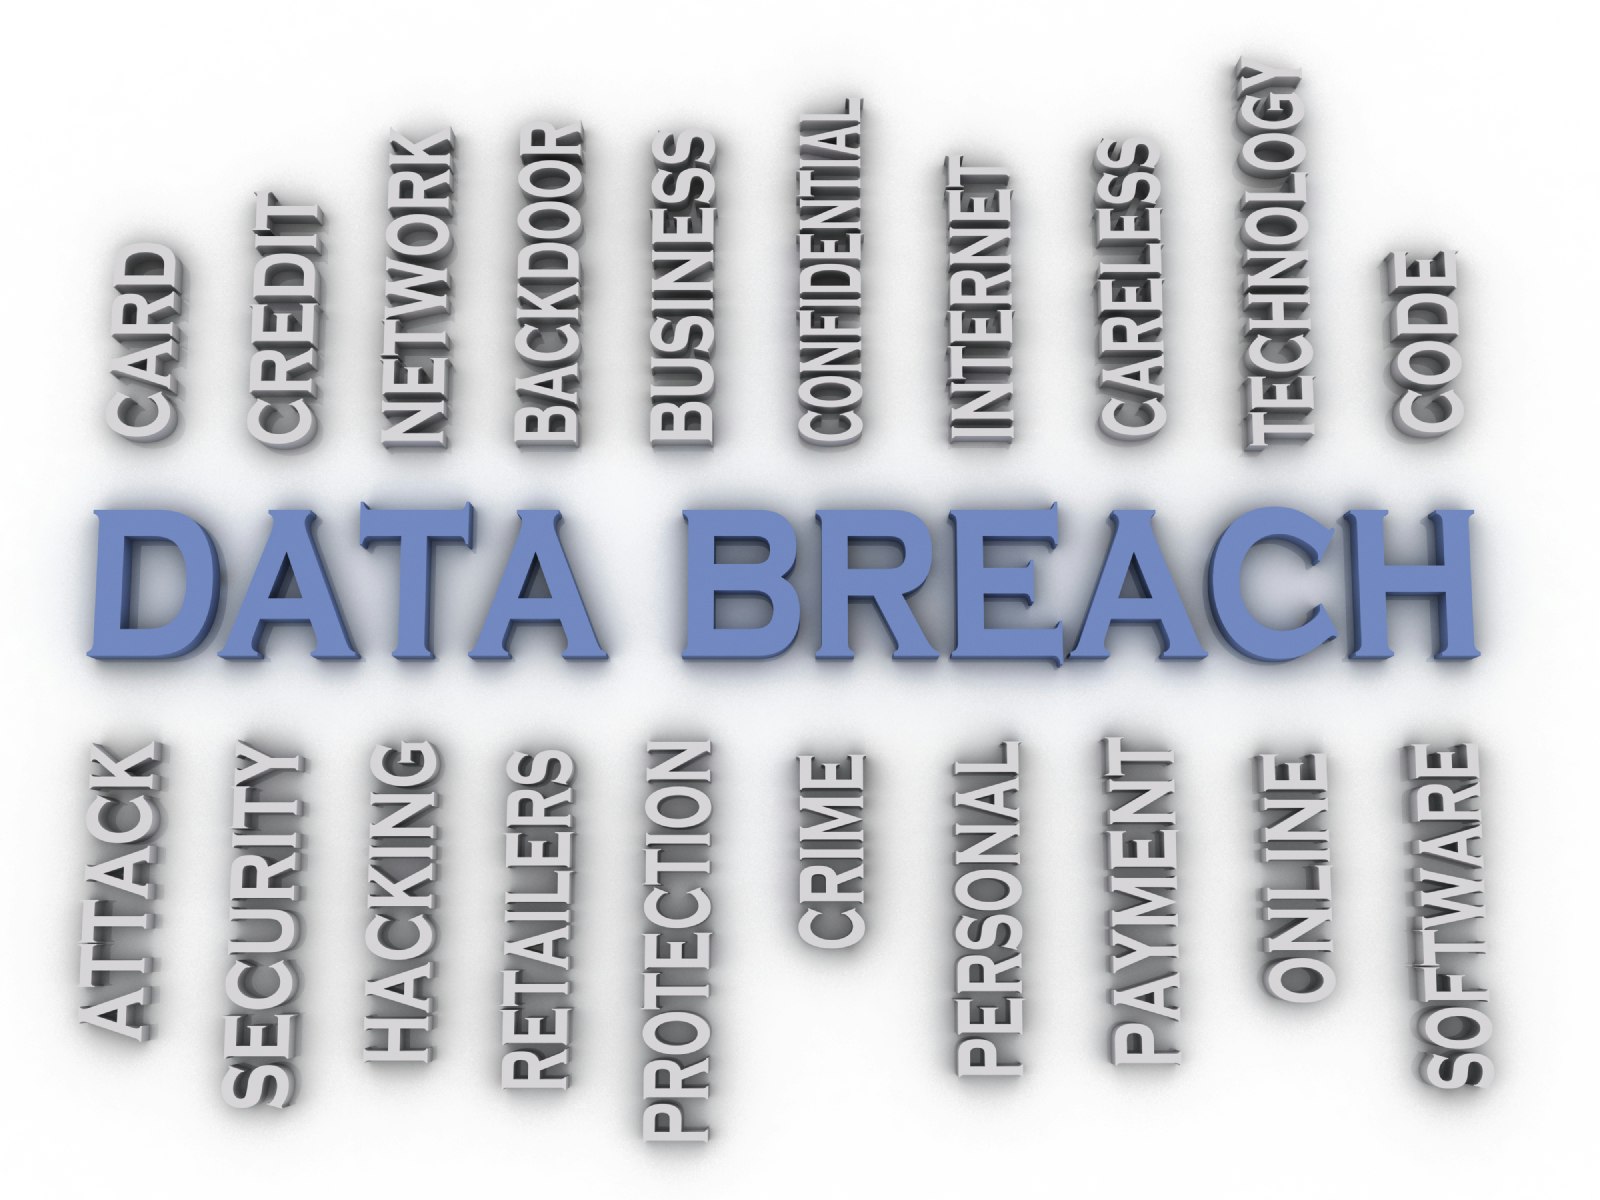 3d image Data Breach issues concept word cloud background